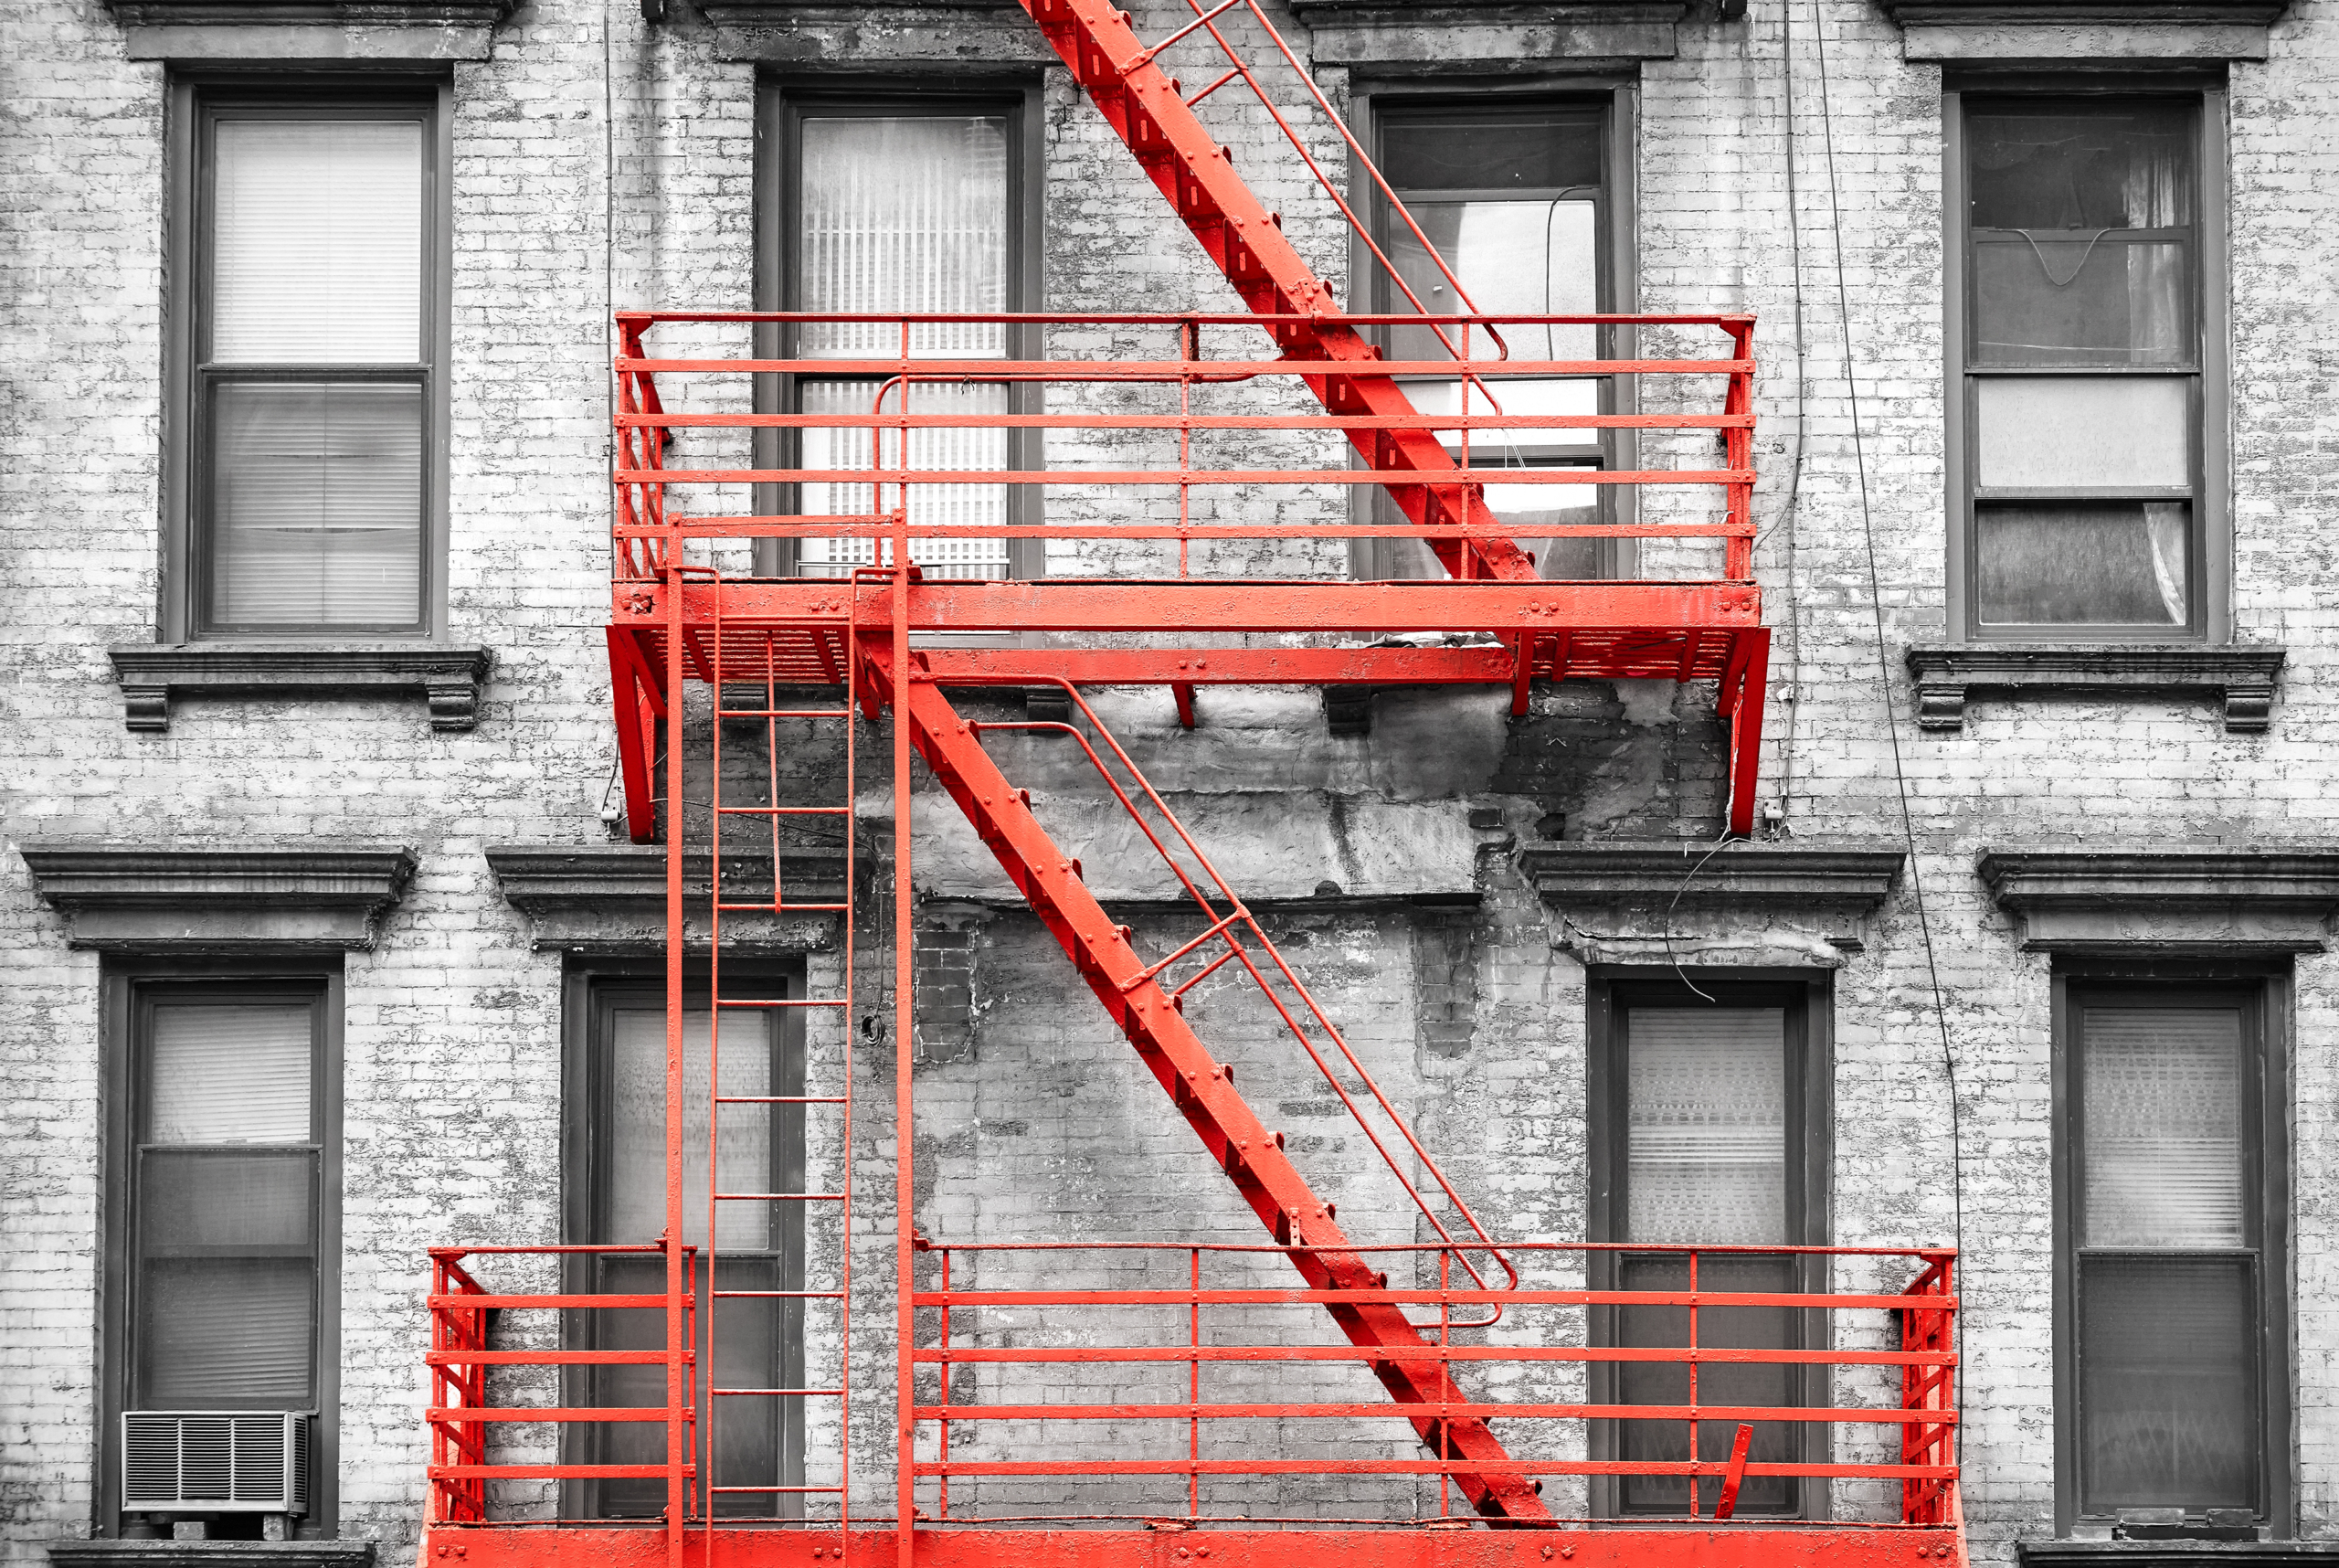 Red fire escape at black and white filtered residential building, NYC.